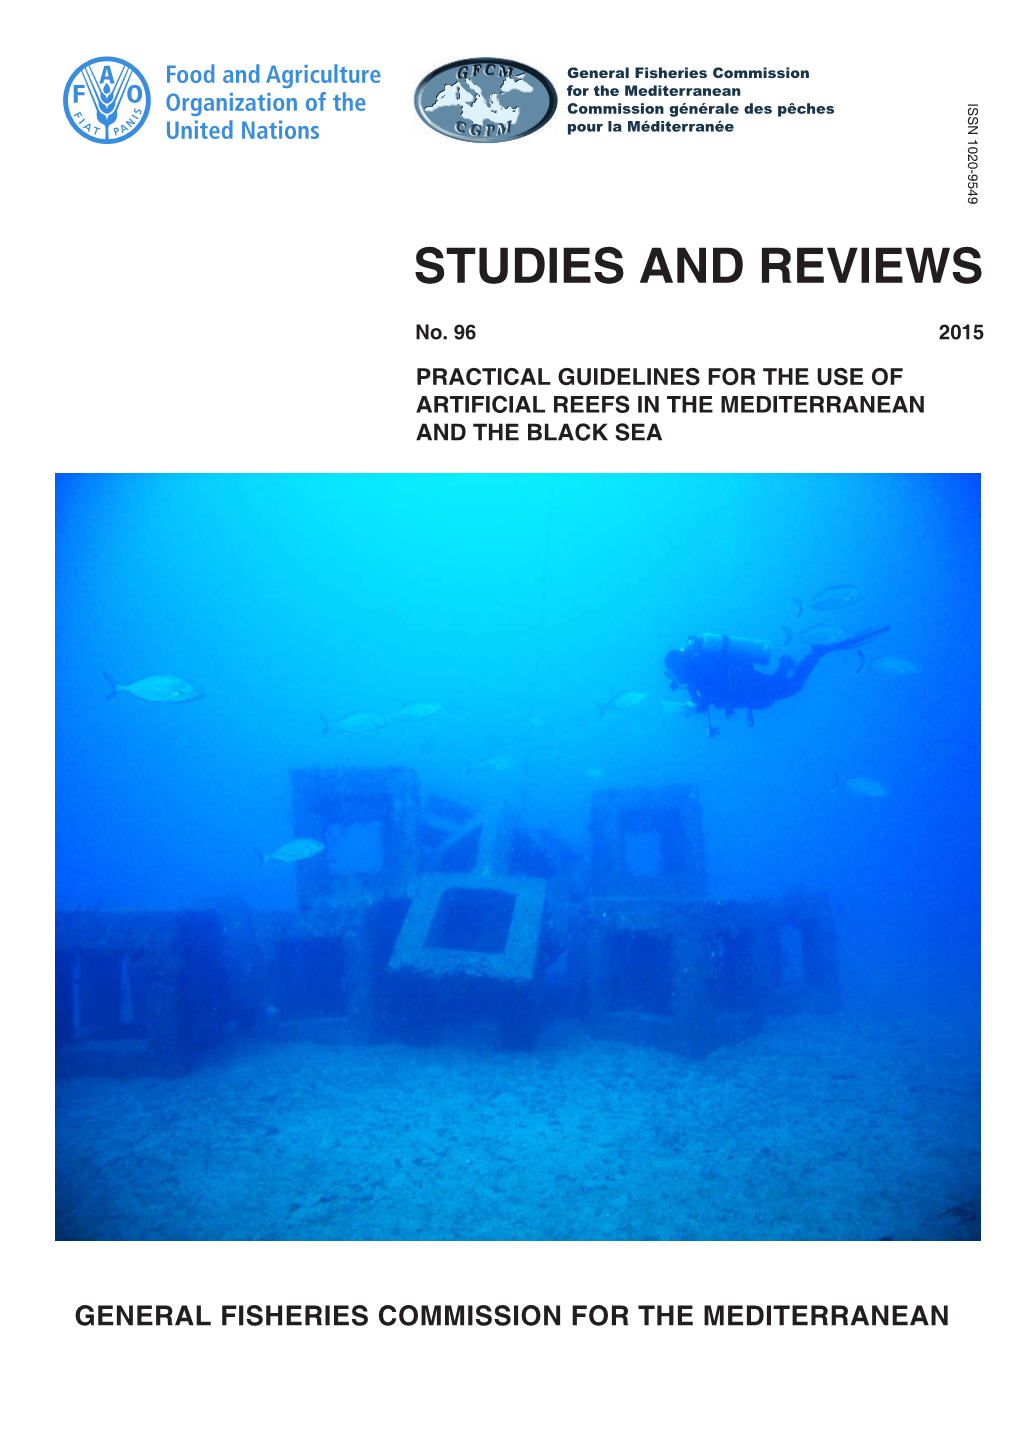 Practical Guidelines for the Use of Artificial Reefs in the Mediterranean and the Black Sea